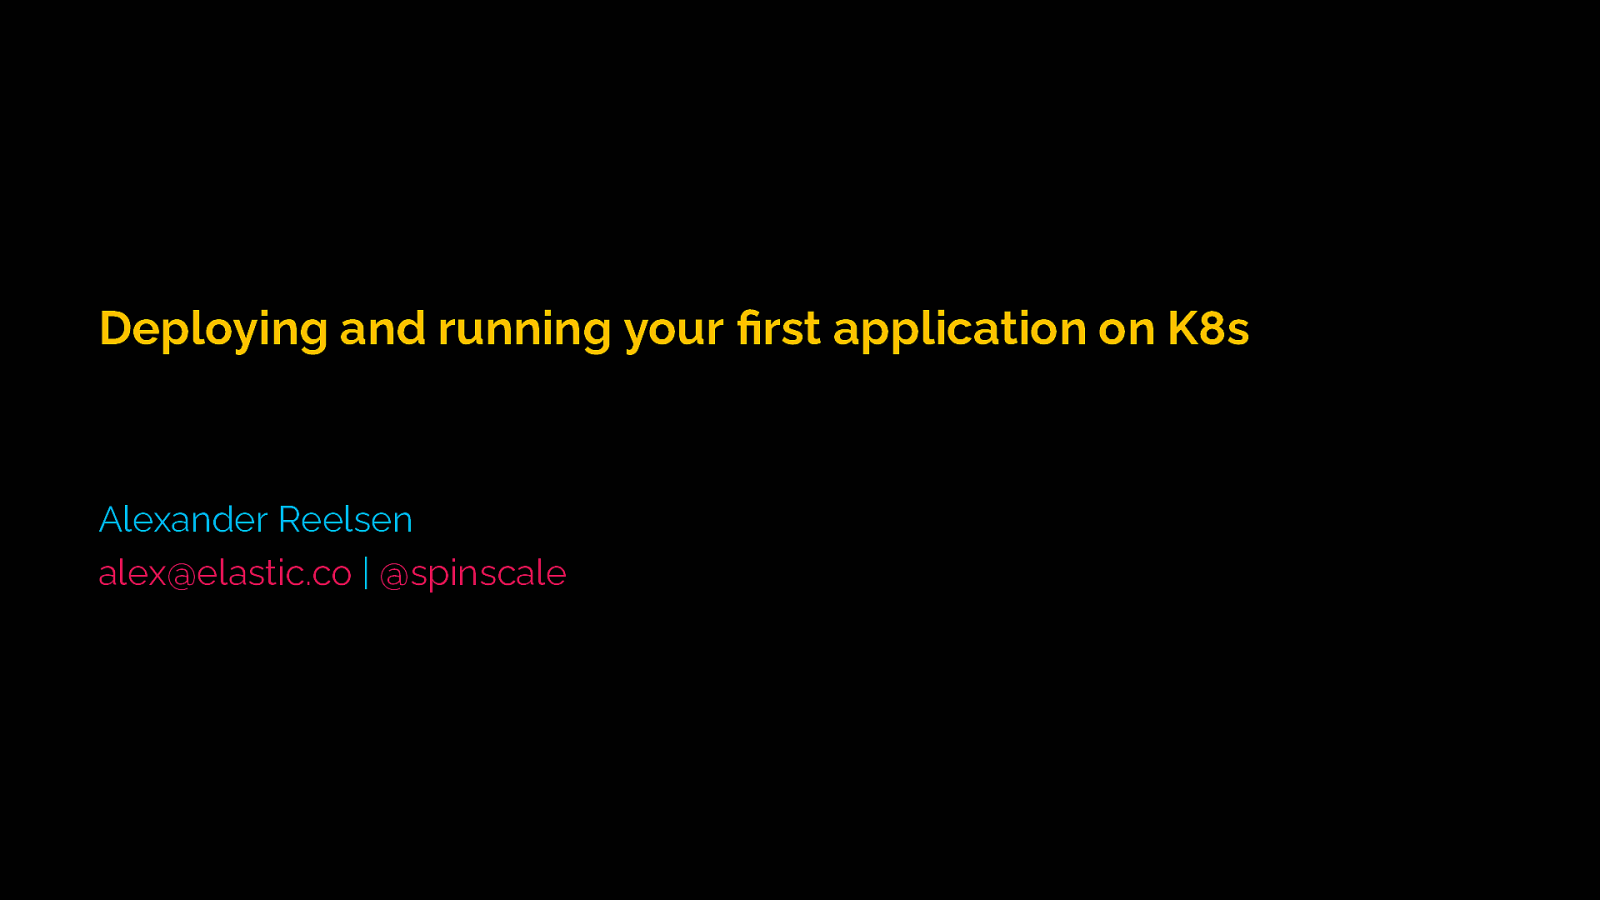 Deploying and running your first application on K8s